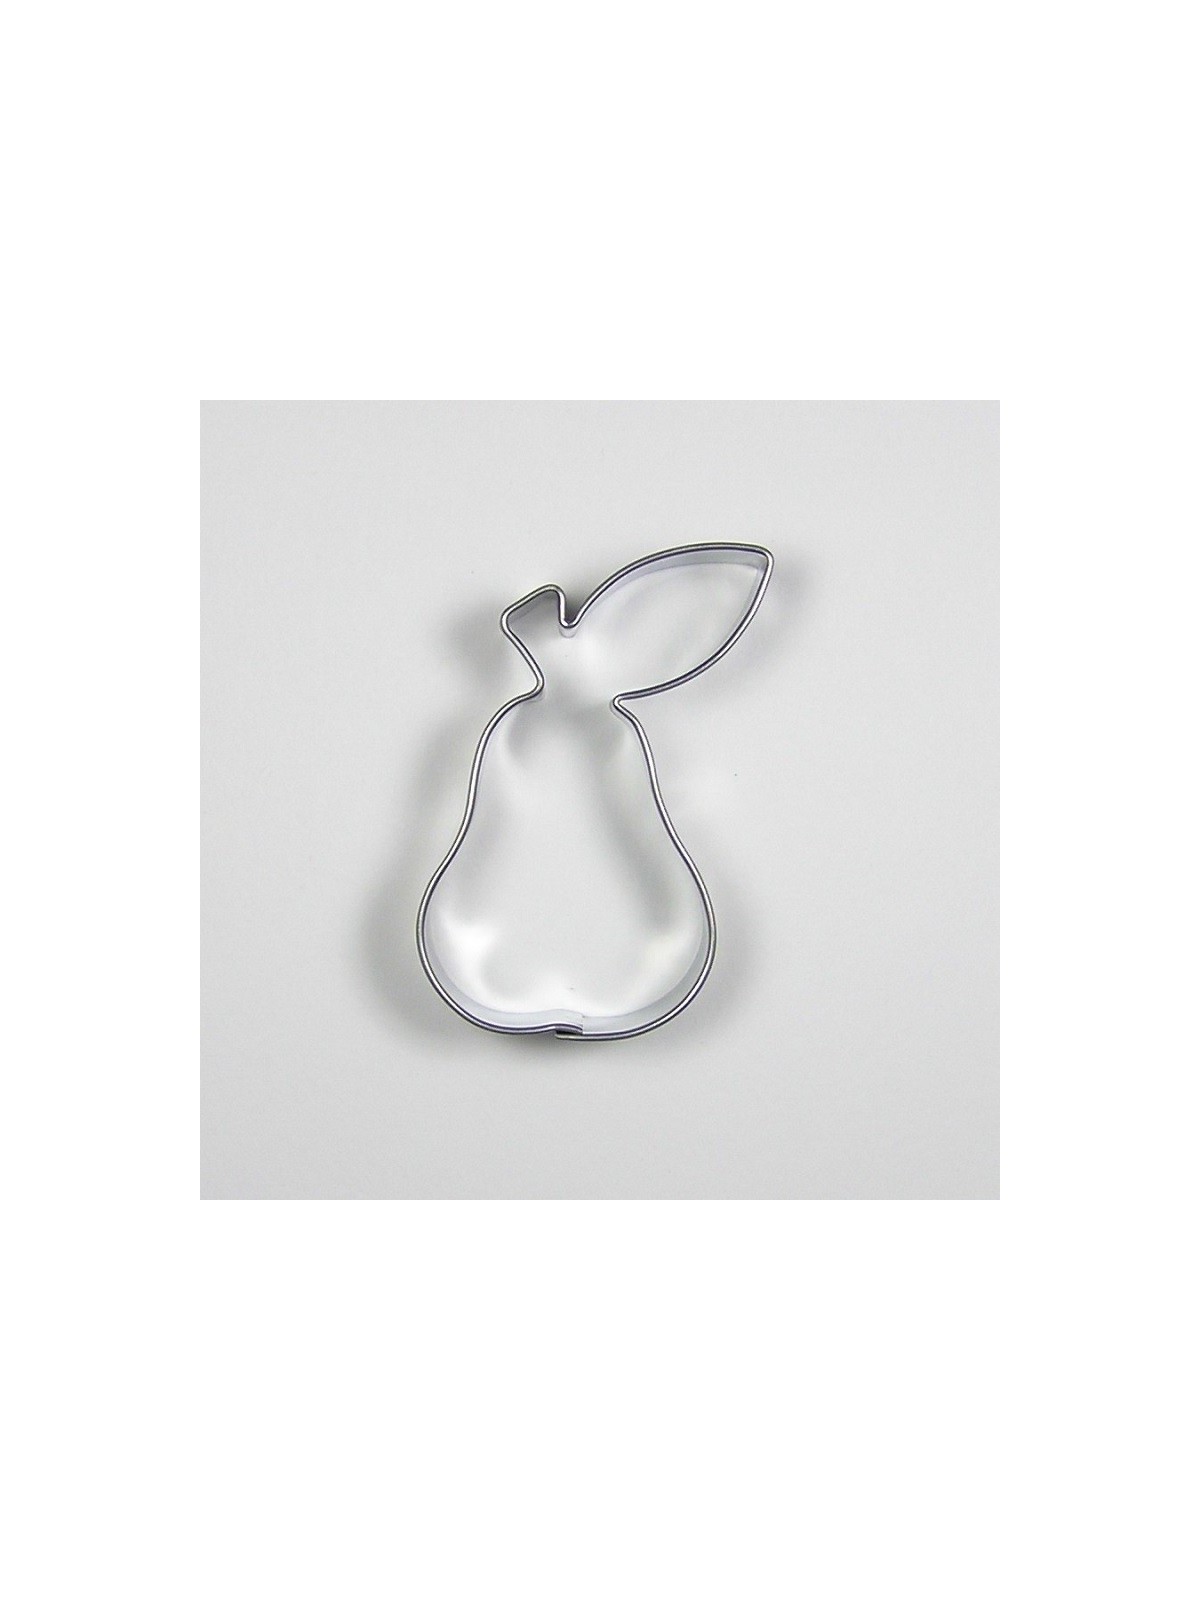 Stainless steel cutter - pear